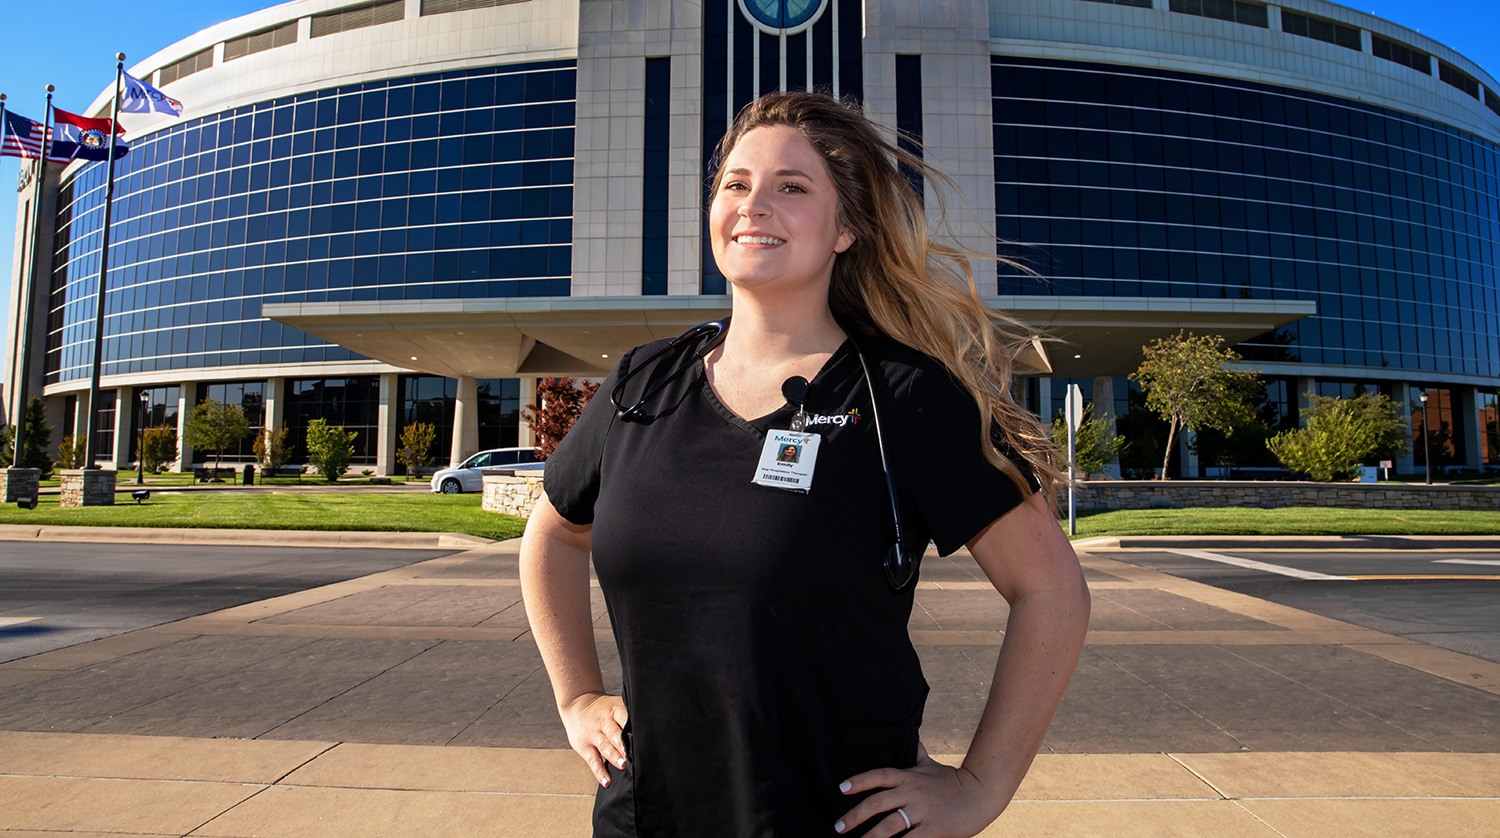 Emily Dye, a graduate of the OTC Respiratory Therapy Program, stands confidently in front of Mercy Hospital where she is employed.